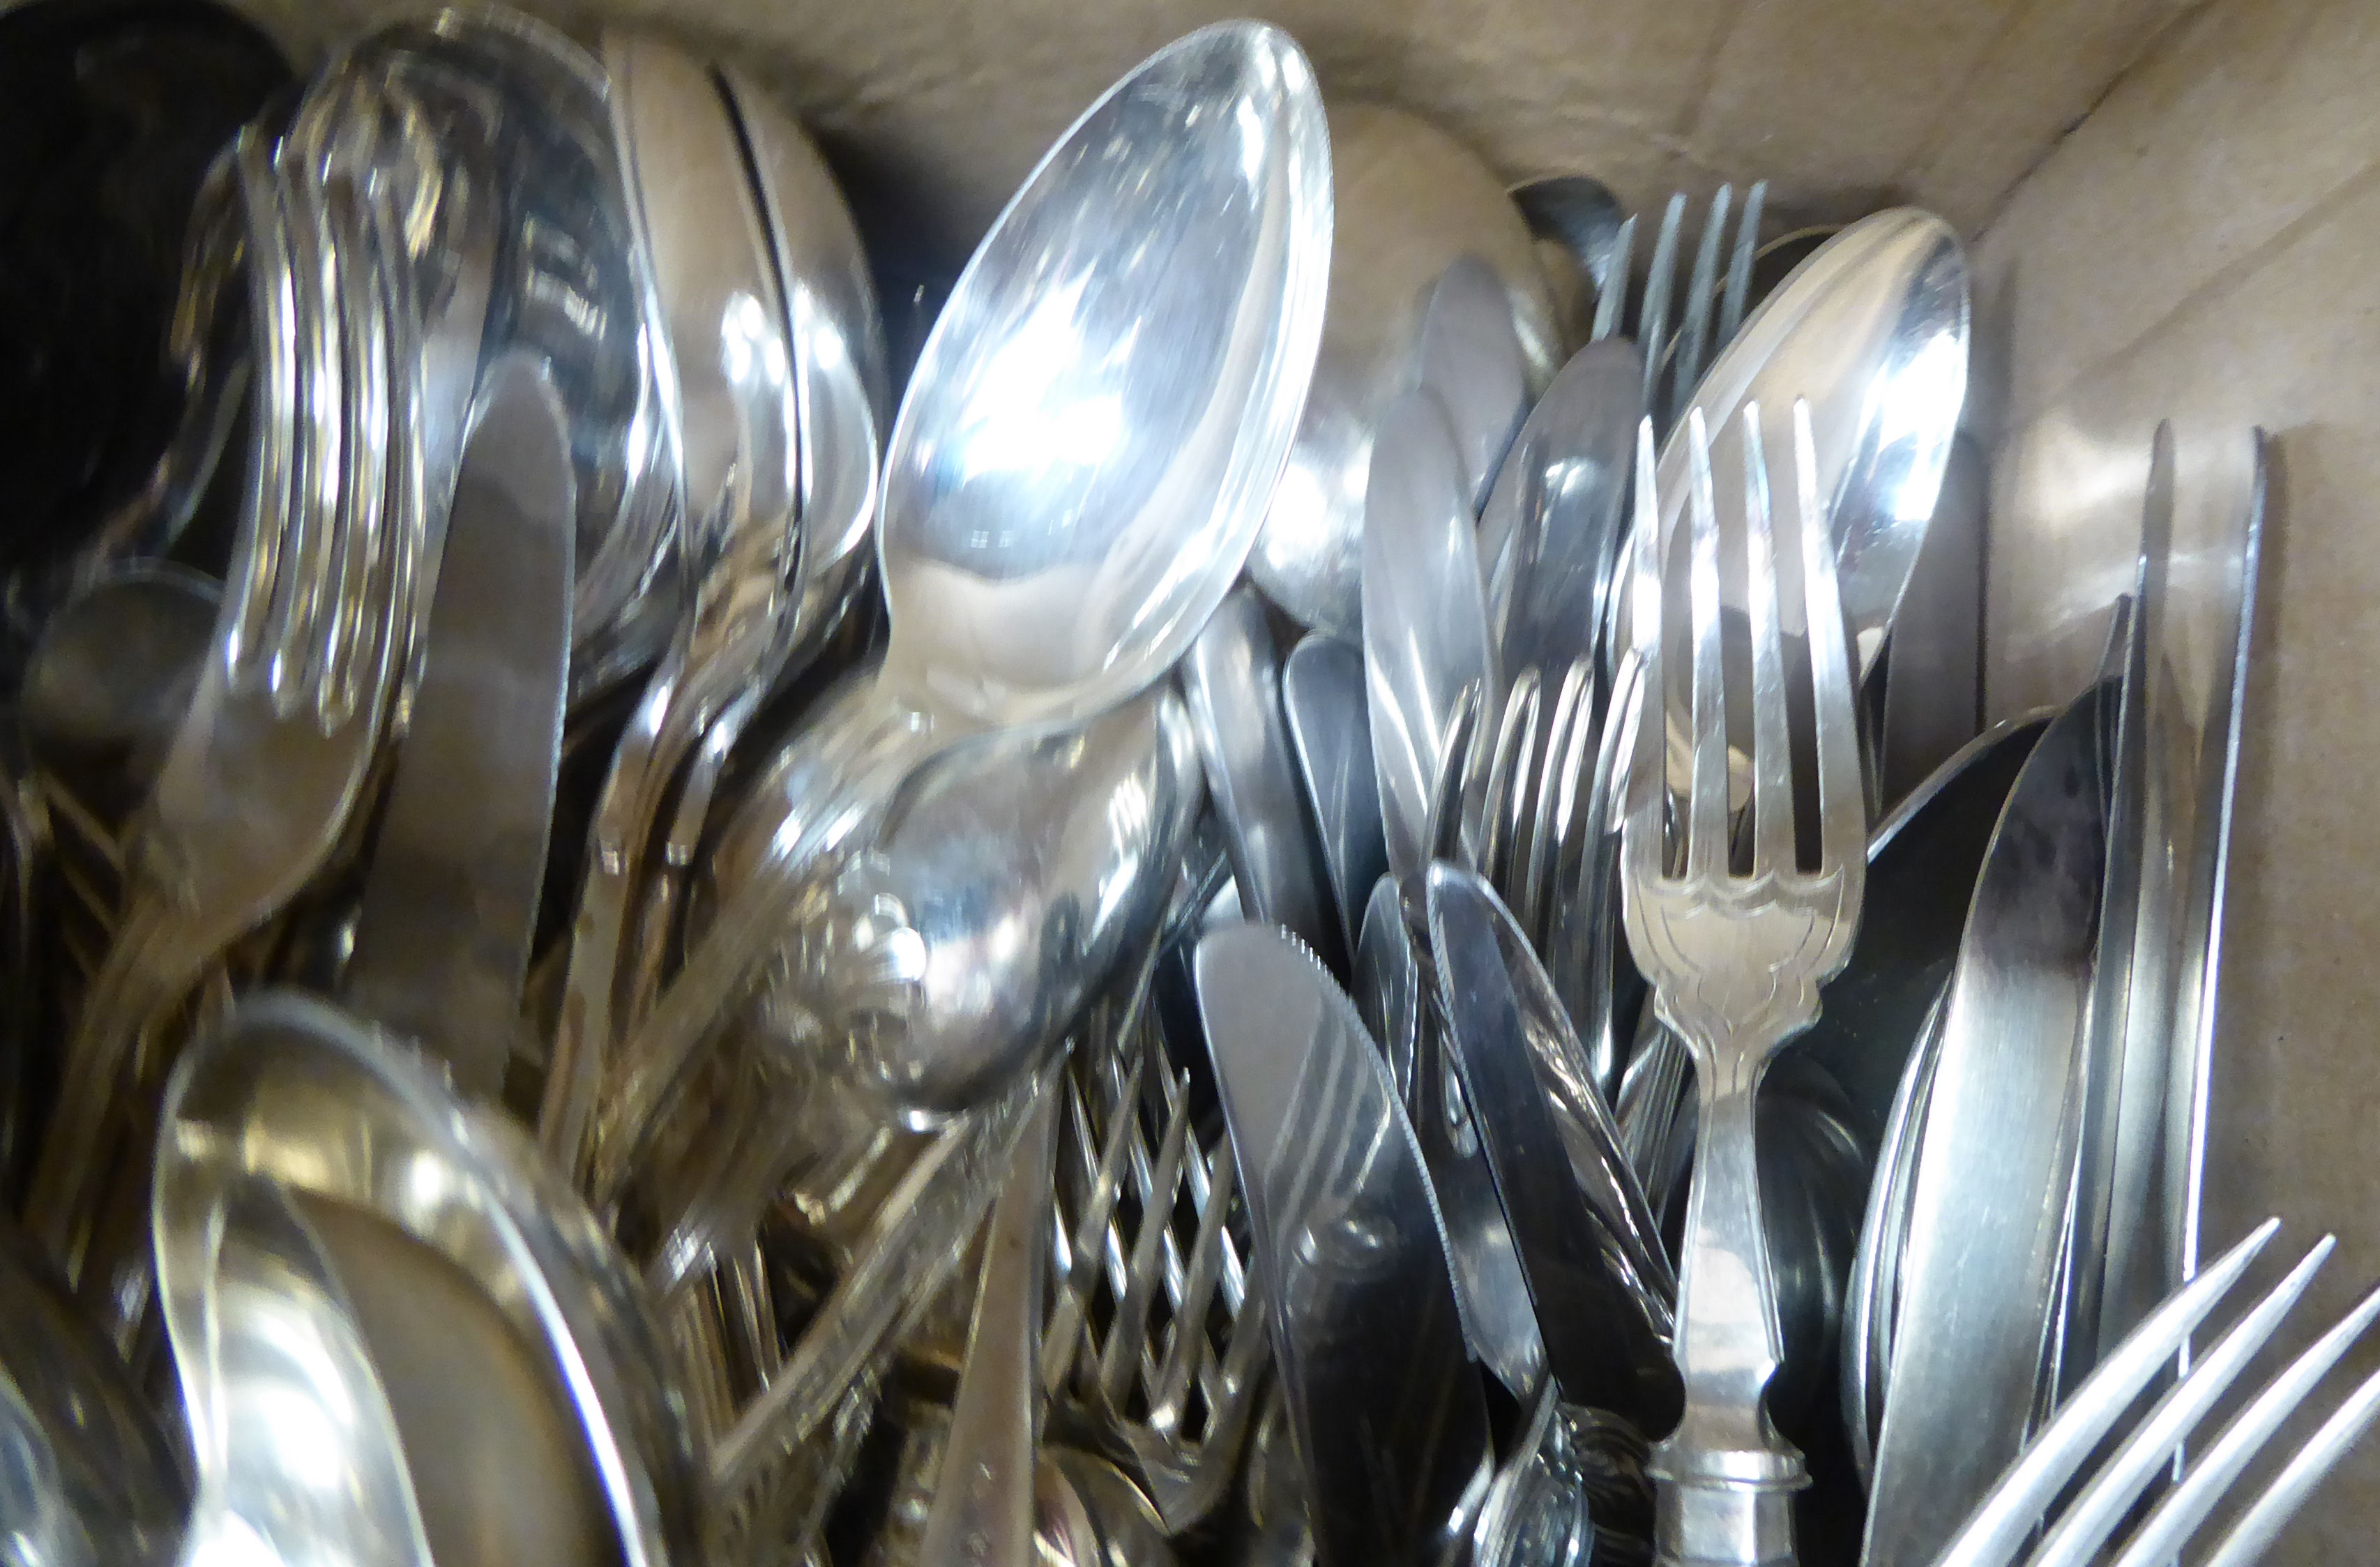 Mainly EPNS Kings and other pattern cutlery and flatware SR - Image 2 of 2